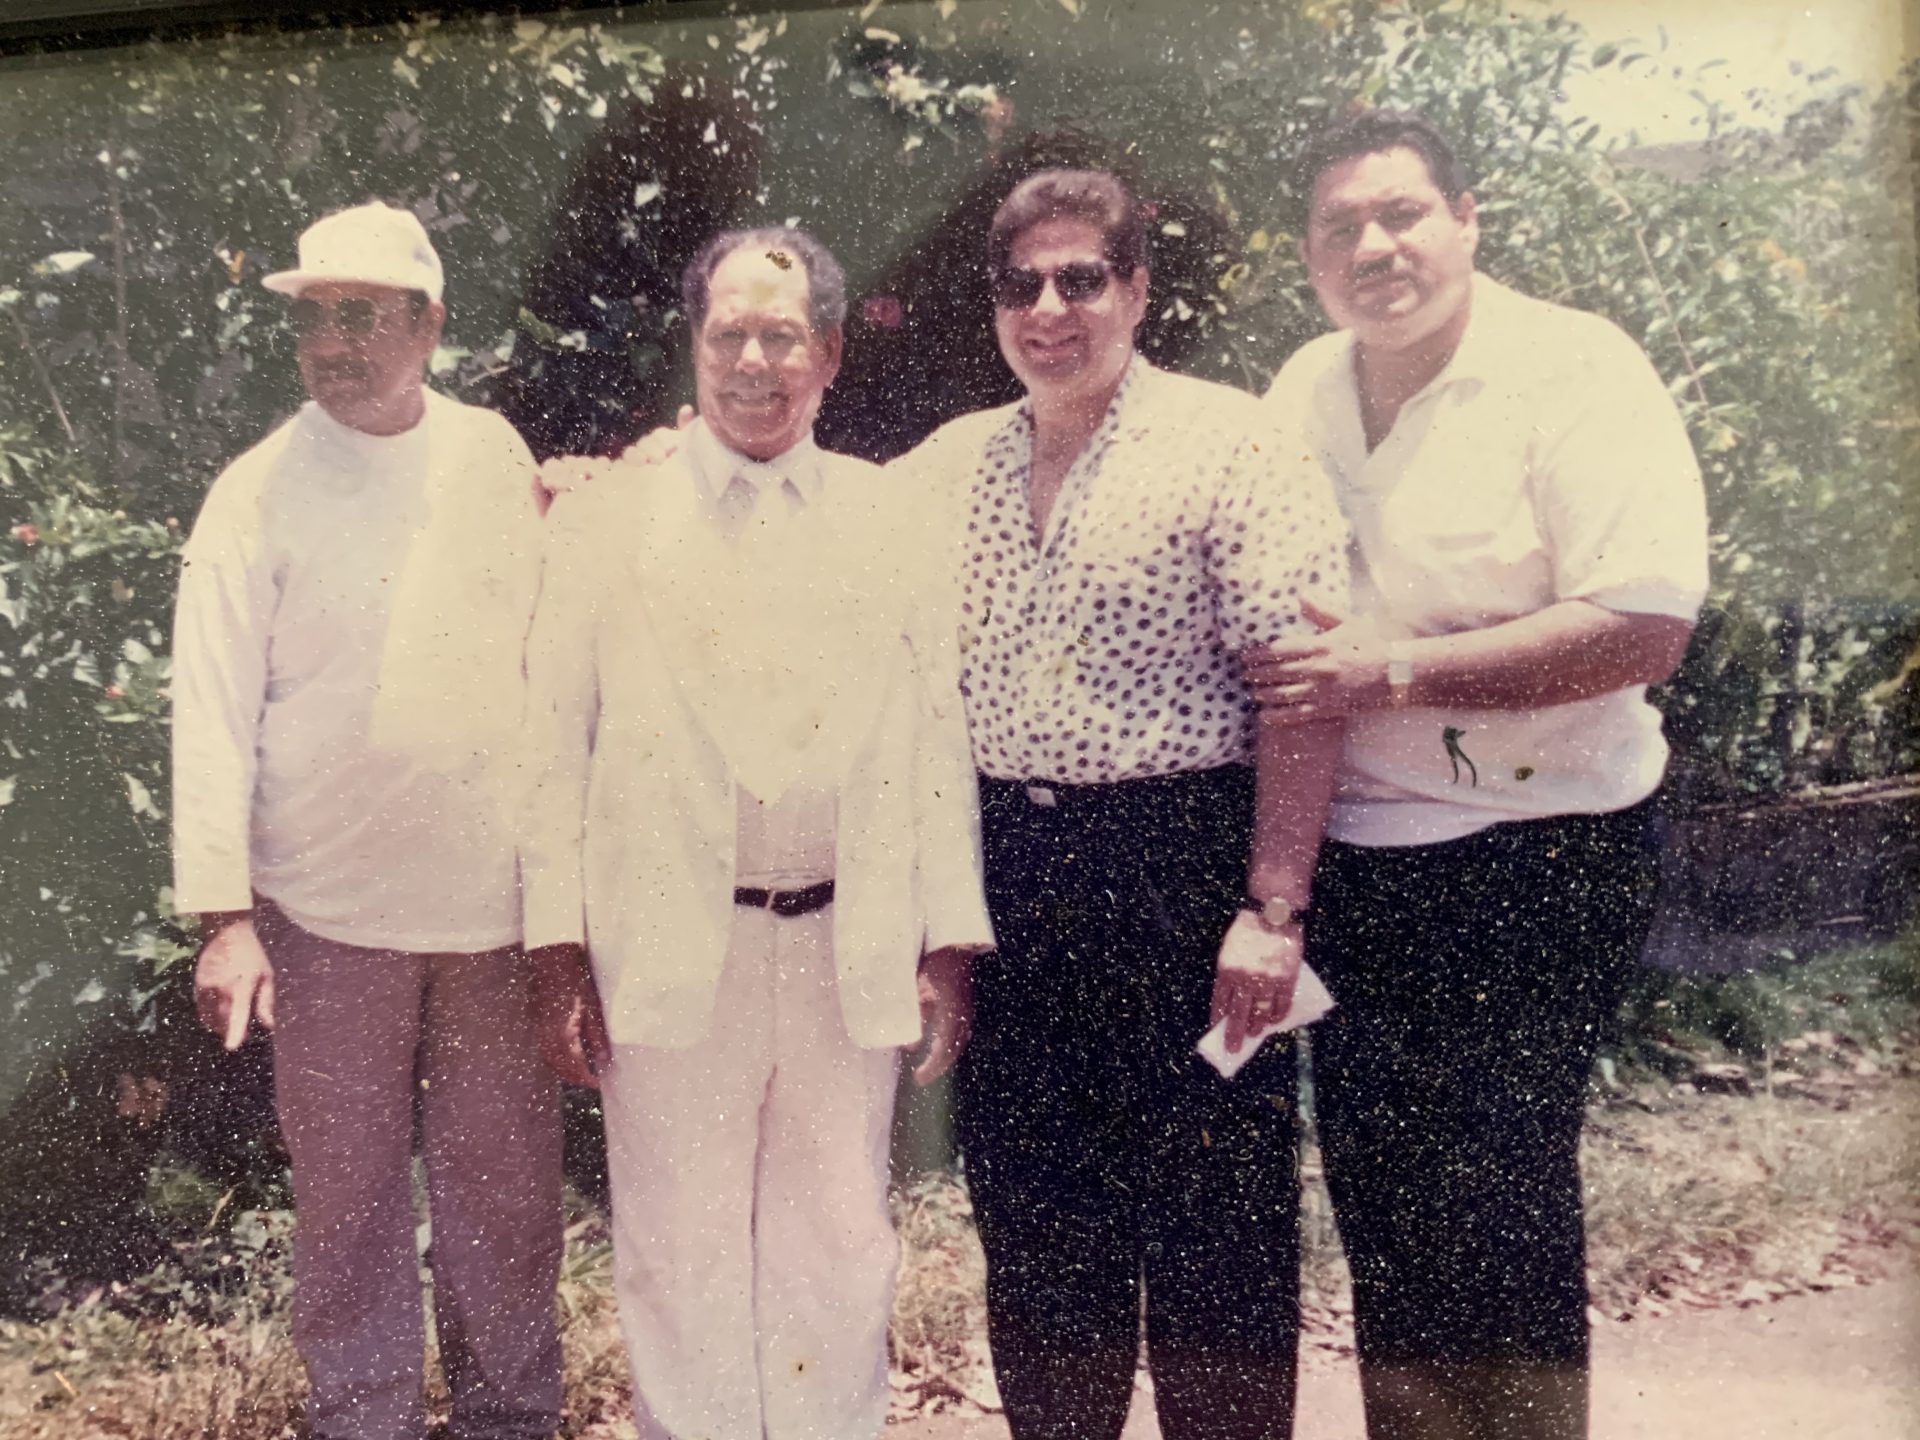 Hey brother Lee. Here we are the Perez clan. Santos, Papi, me and you.  RIP my brother.